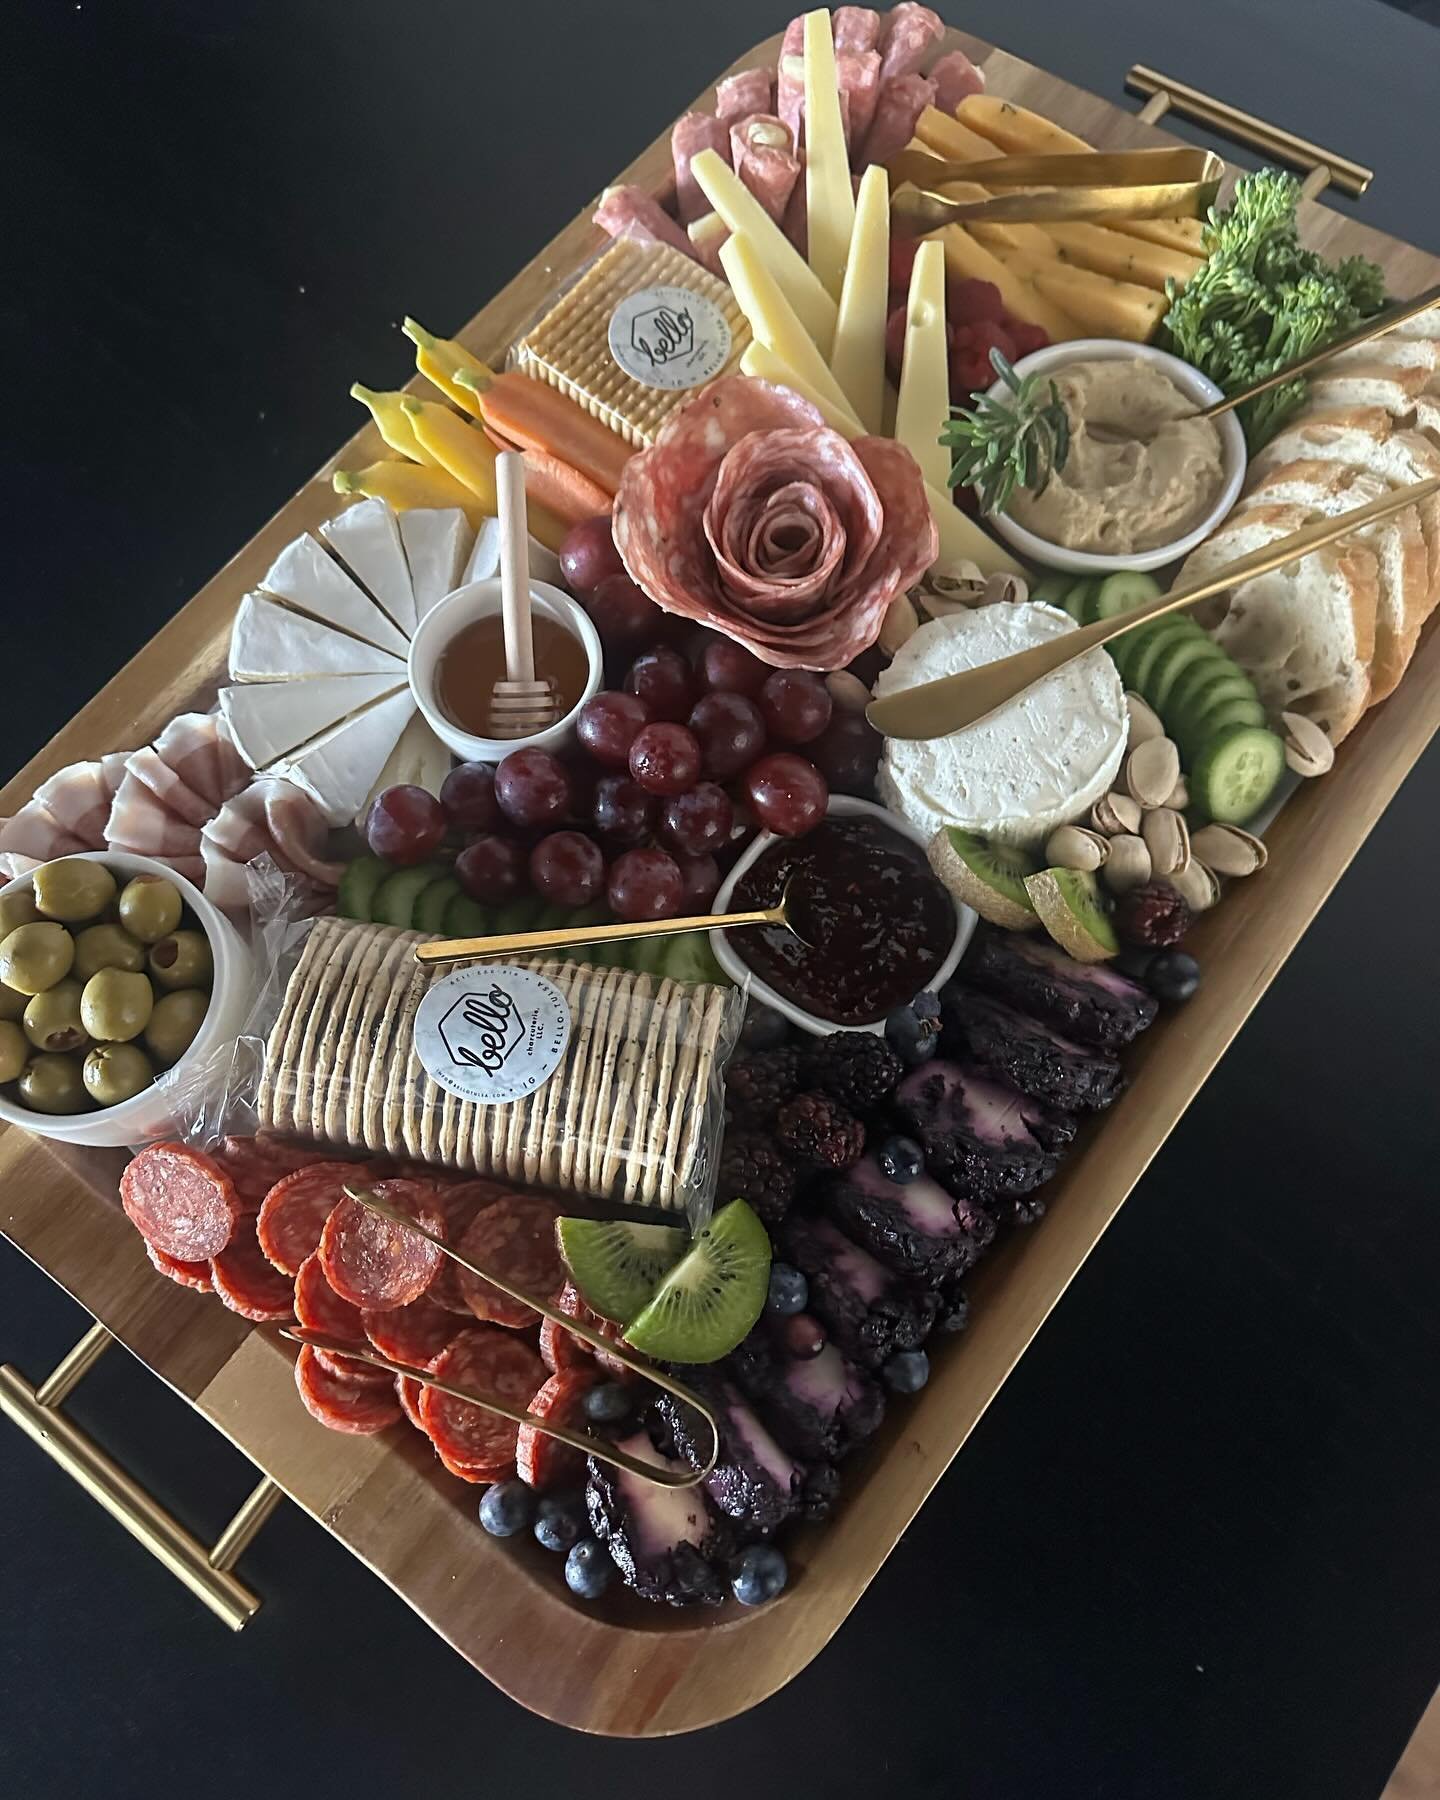 Pookie is looking absolute fire tonight!🔥🔥 

Pookie (Britt) is wearing her finest cheese, charcuterie, fruits and accompaniments. 

DM or order online. Links in bio. 🔗
#iykyk 
#pookieandjett
#charcuterie 
#bello
#tulsacatering